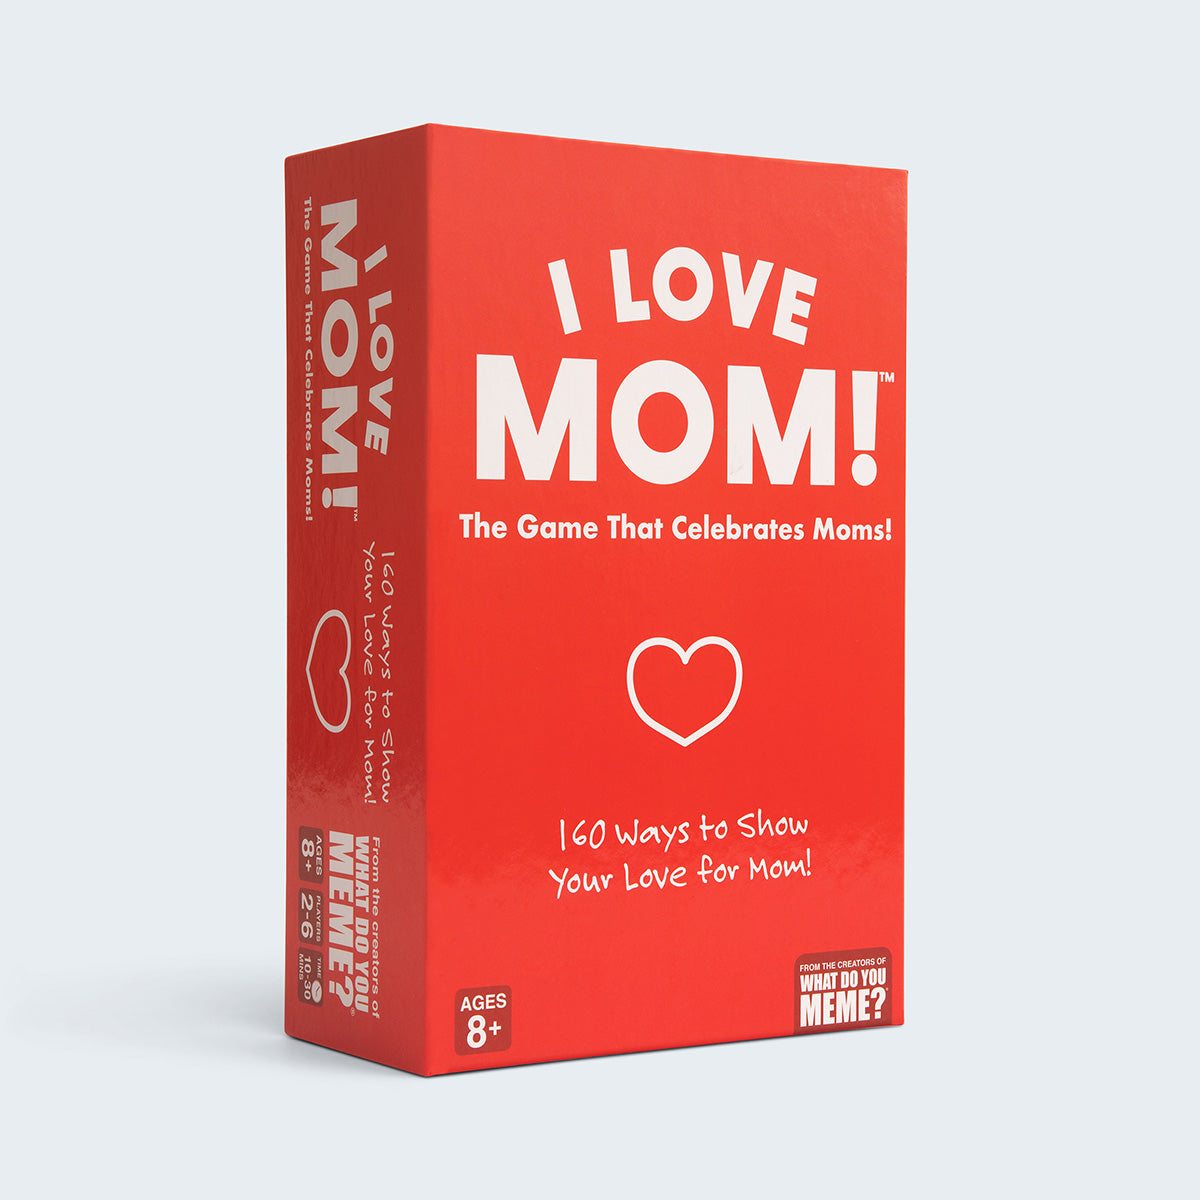 i-love-mom-game-box-and-game-play-01-what-do-you-meme-by-relatable